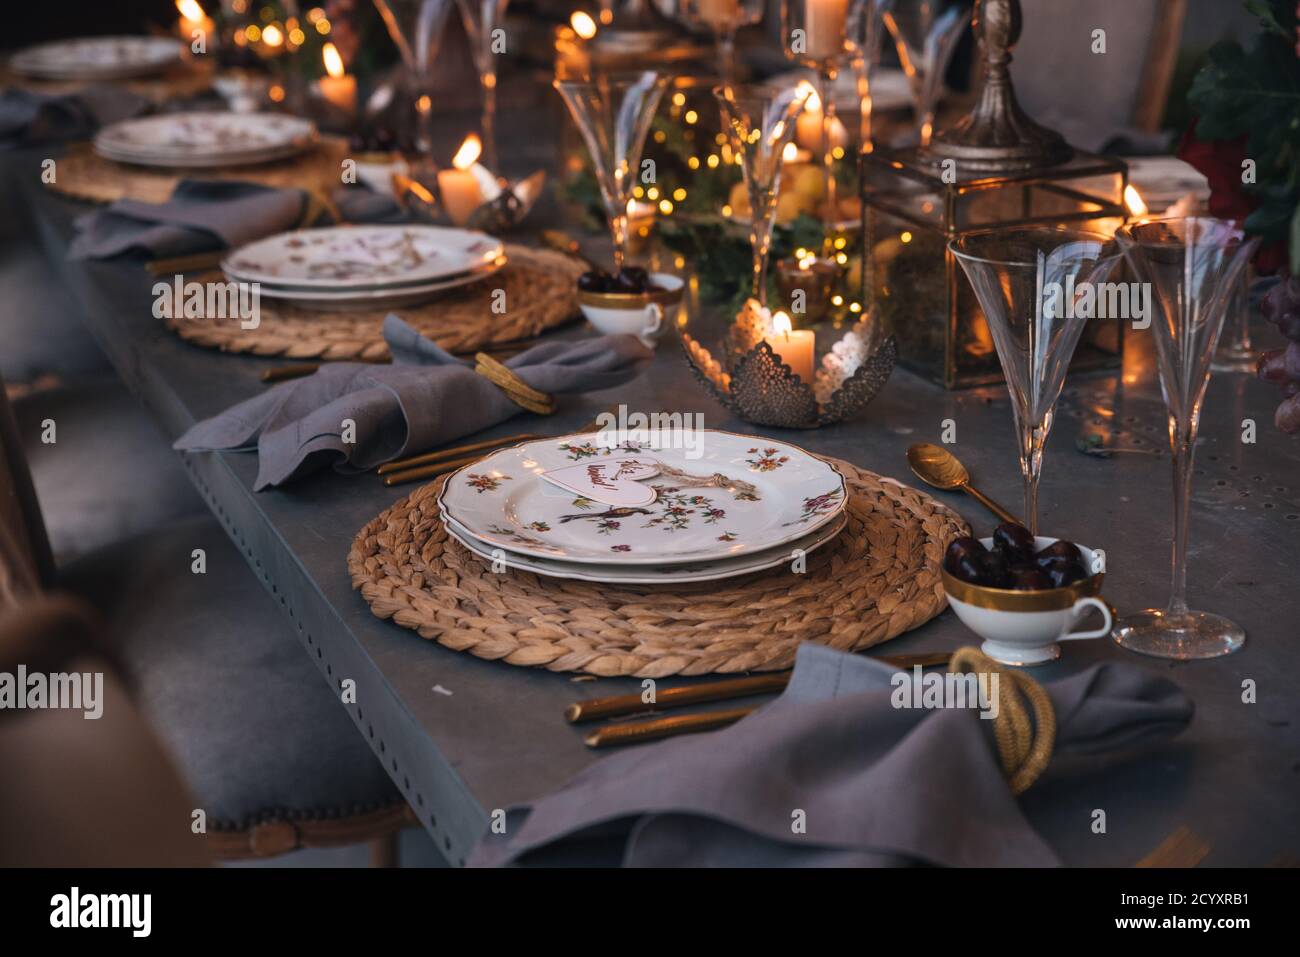 Christmas table with flowers, fruits, candles and glasses. Stock Photo